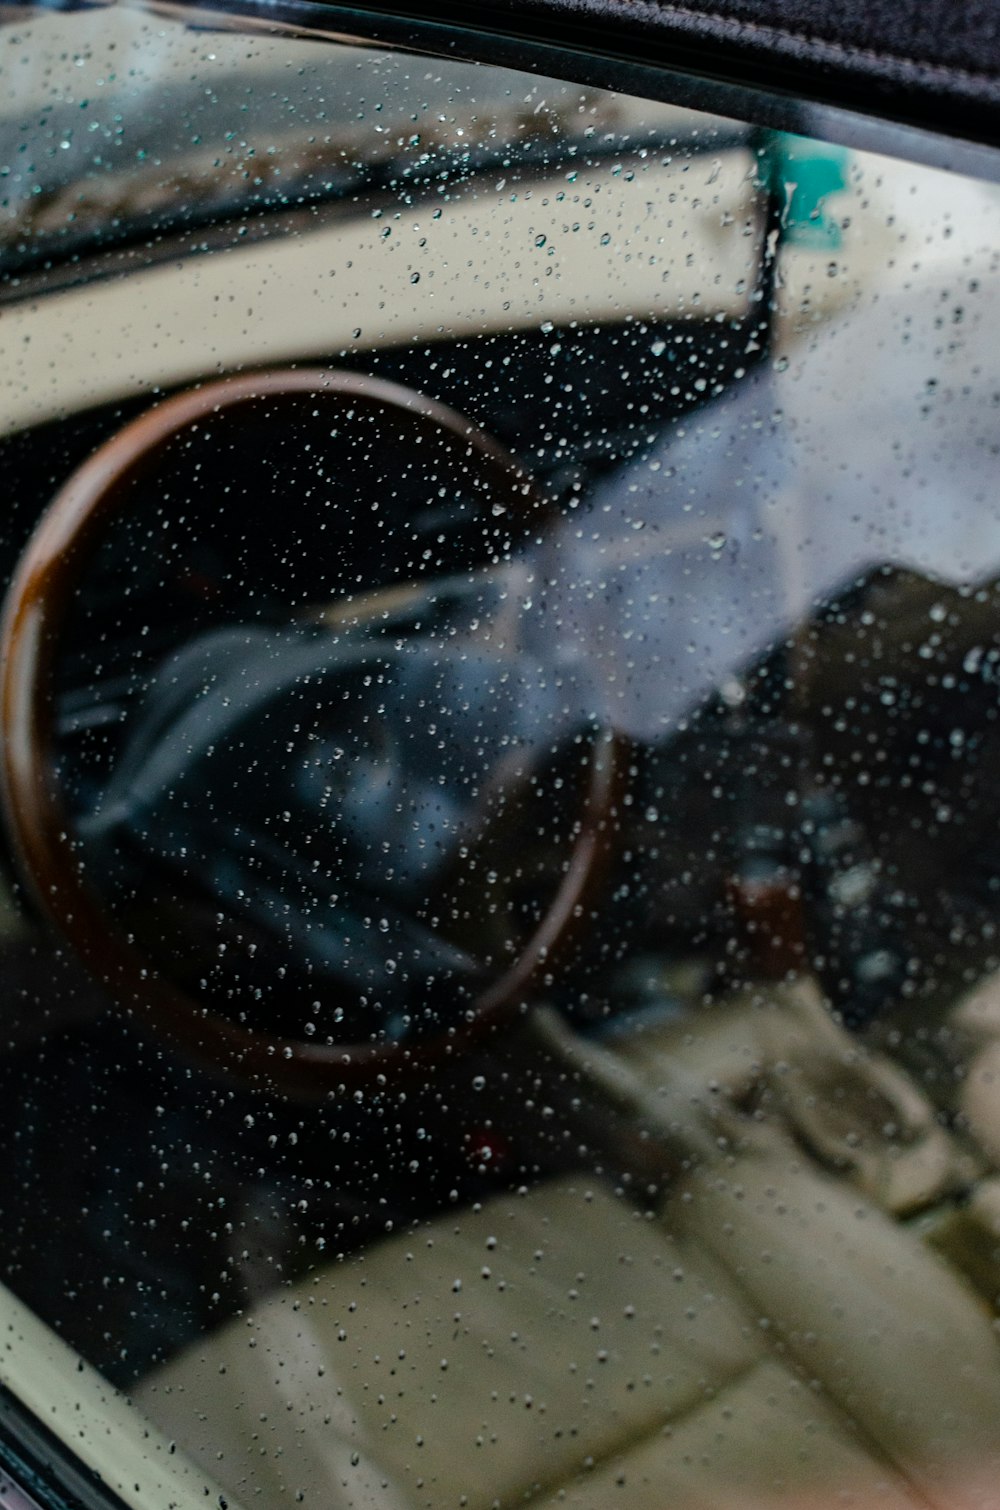 a person sitting in a car in the rain